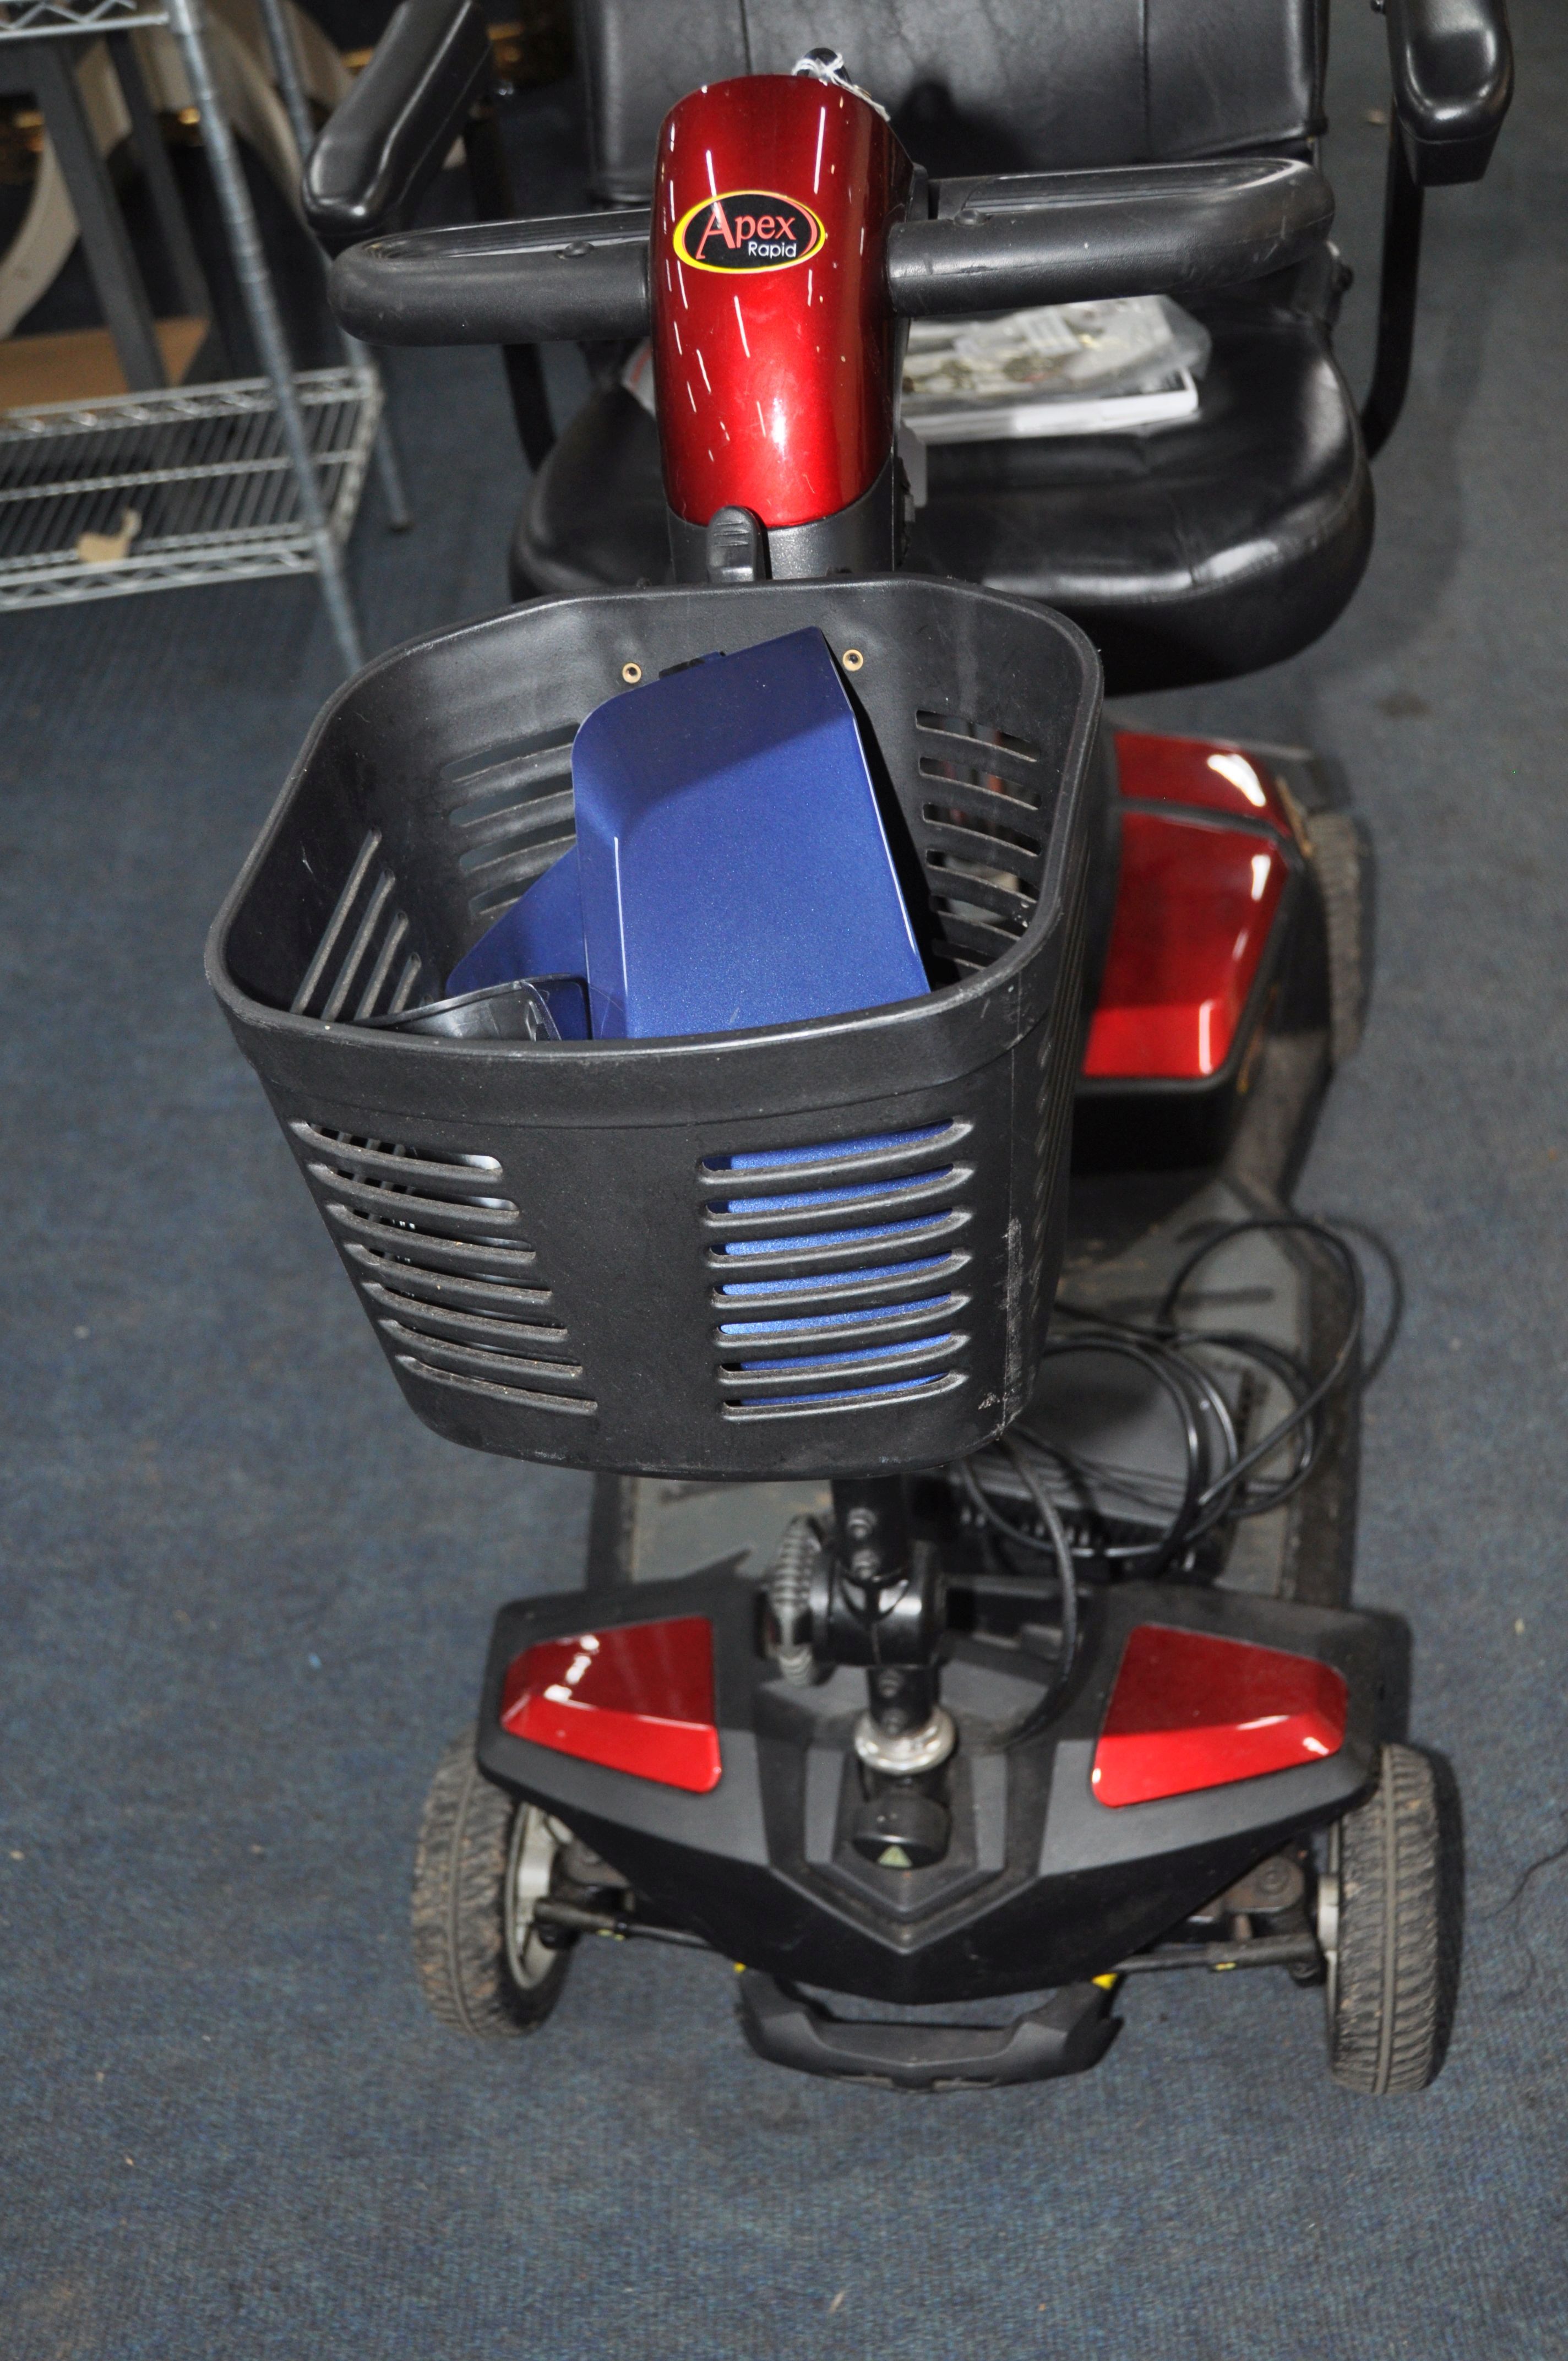 A GO GO ELITE TRAVELLER LX MOBILITY SCOOTER with charger front basket and spare colour change panels - Image 5 of 5